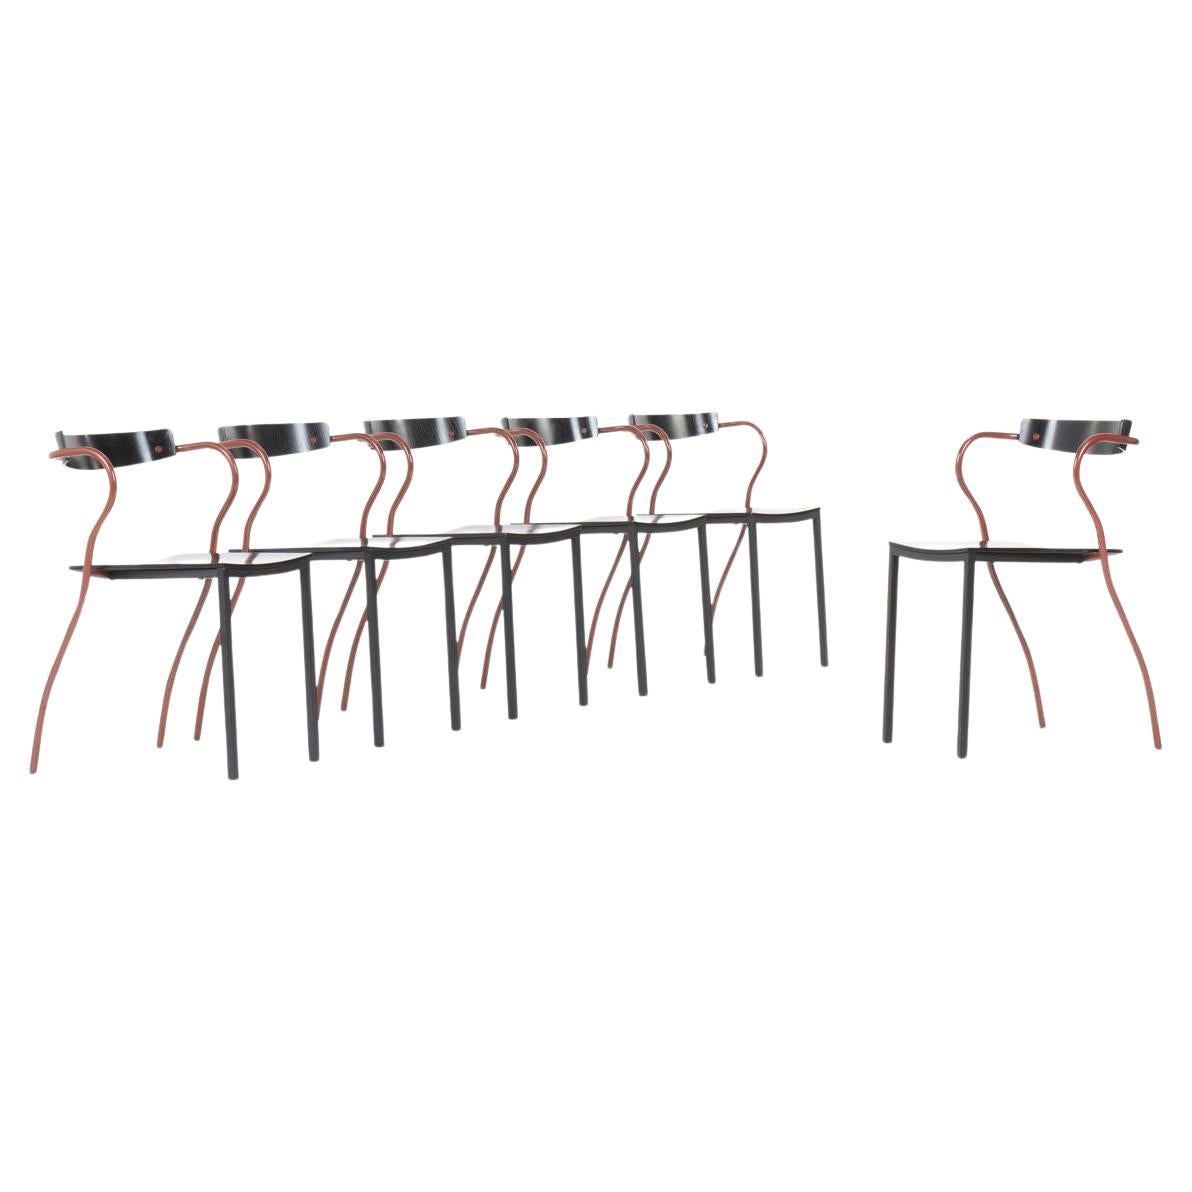 Set of 6 Rio chairs by Pascal Mourgue for Artelano, 1991